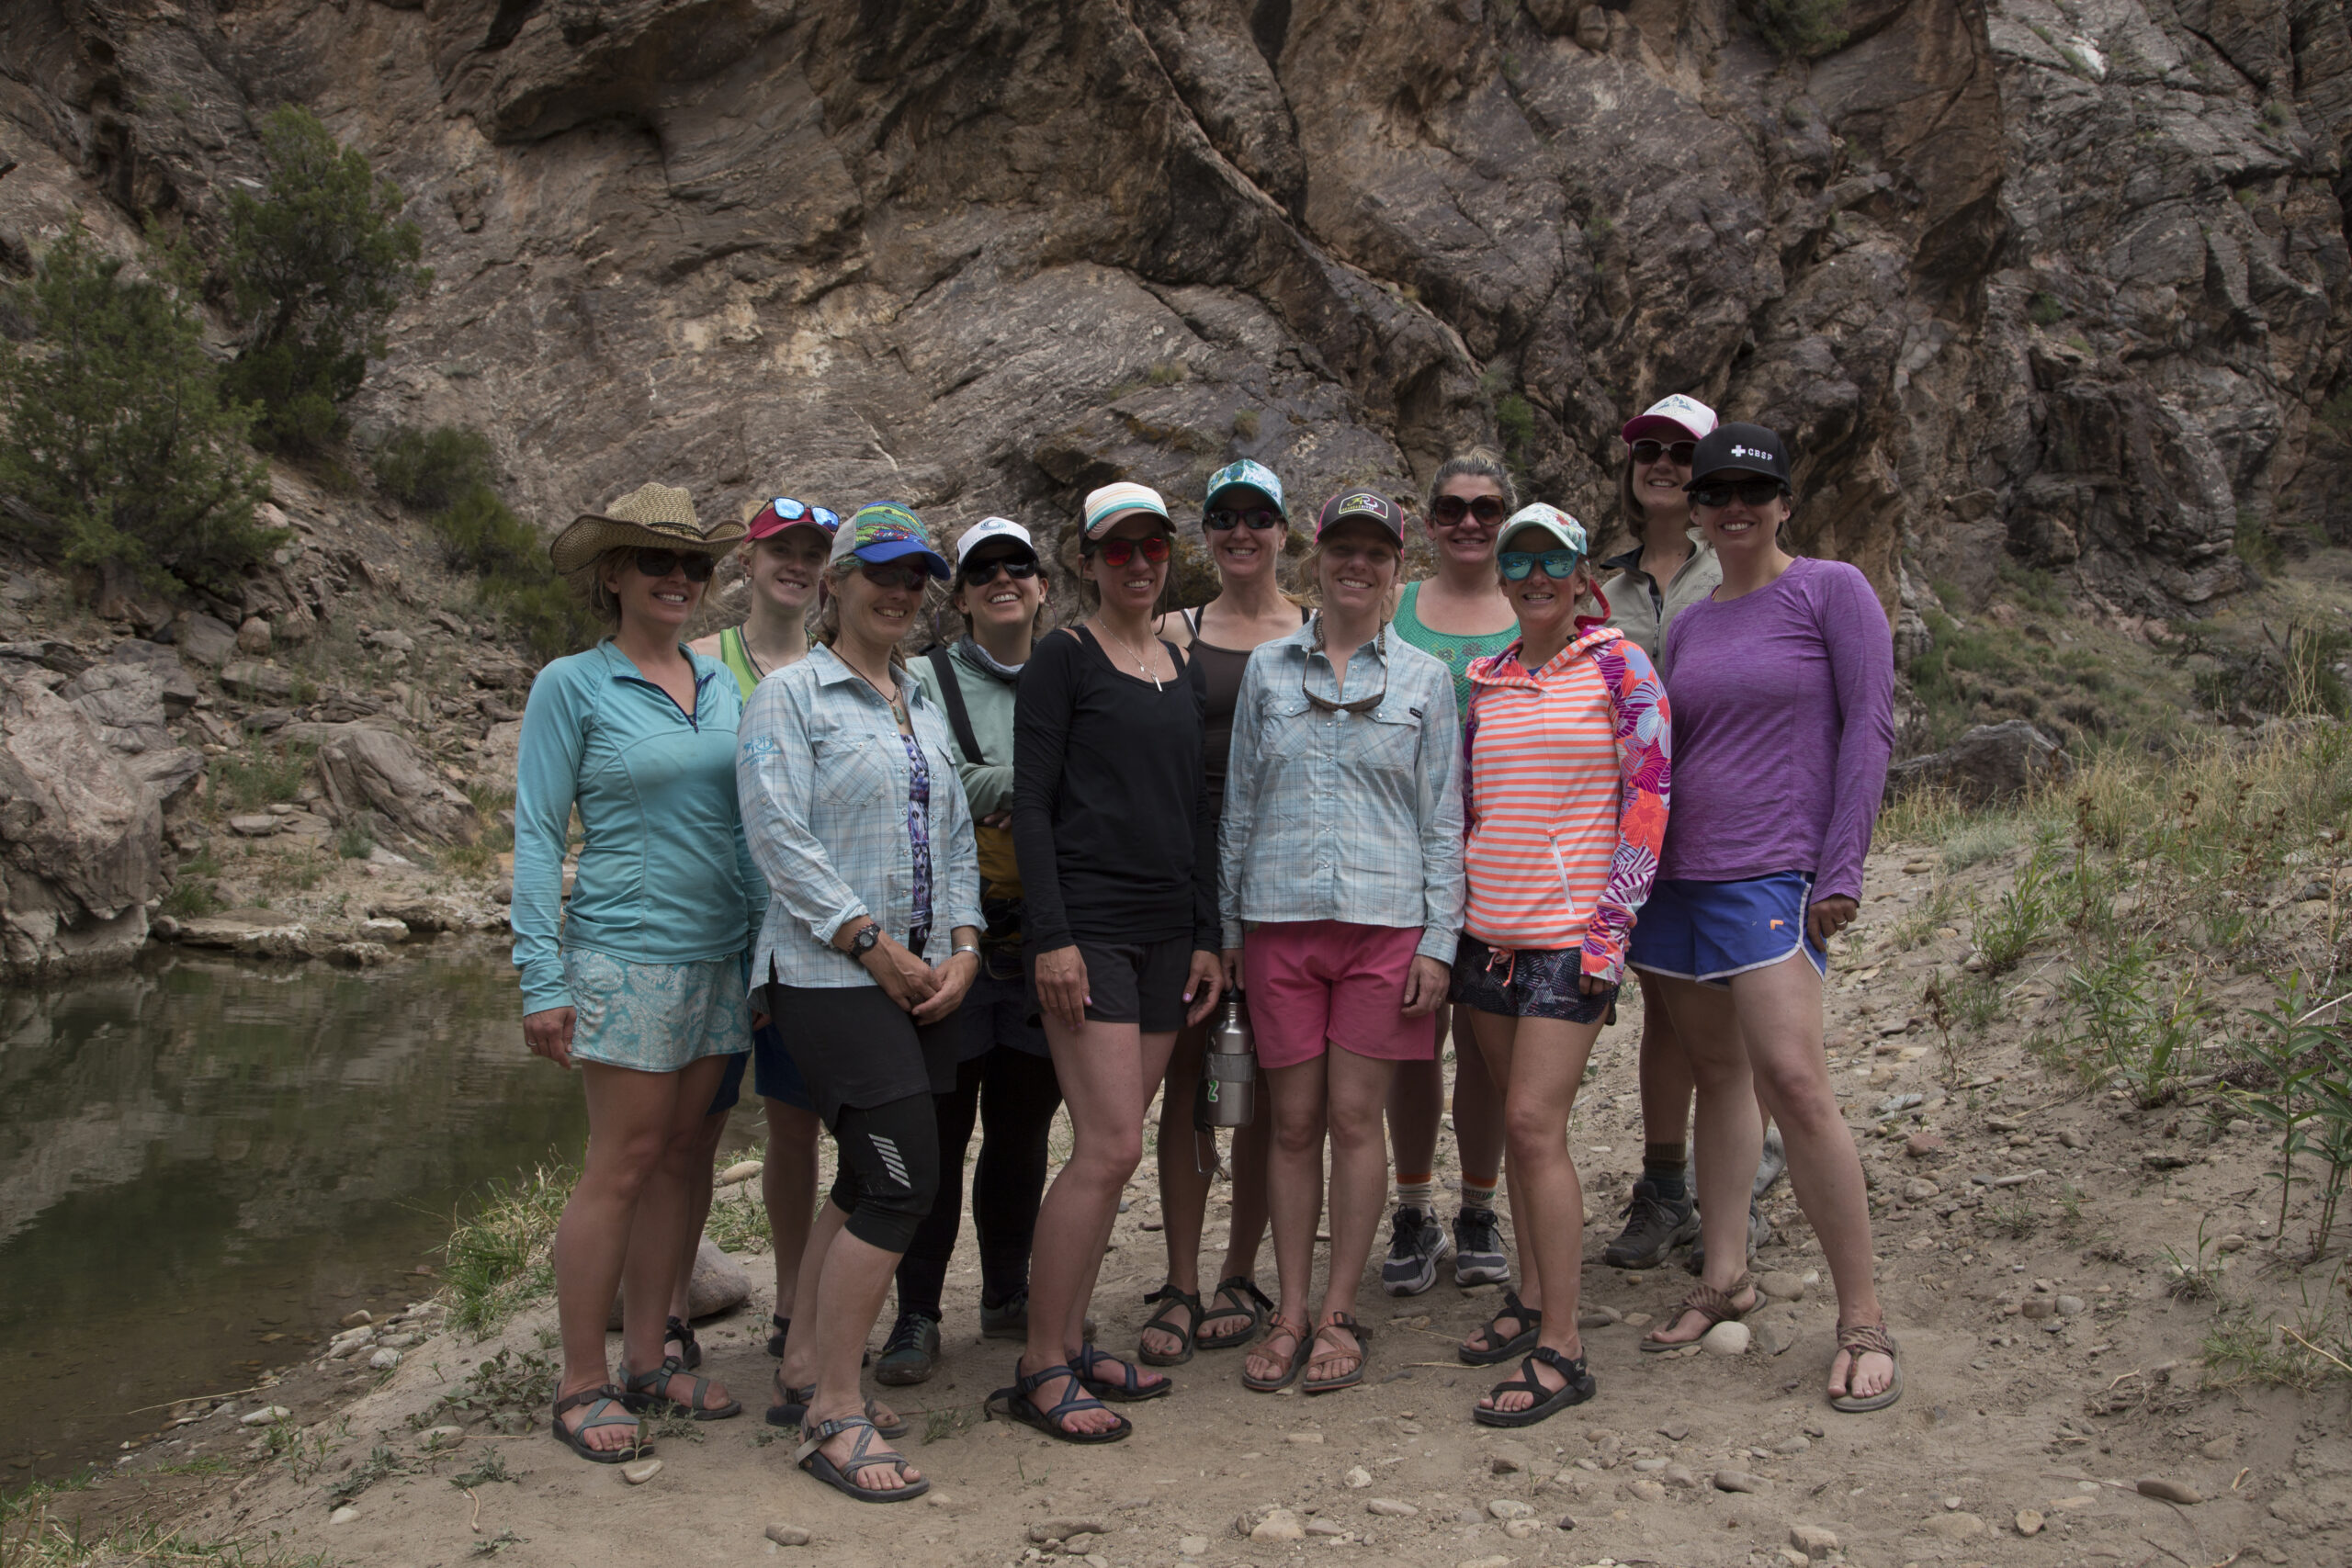 Bachelorette Party Ideas In Colorado - Whitewater Rafting